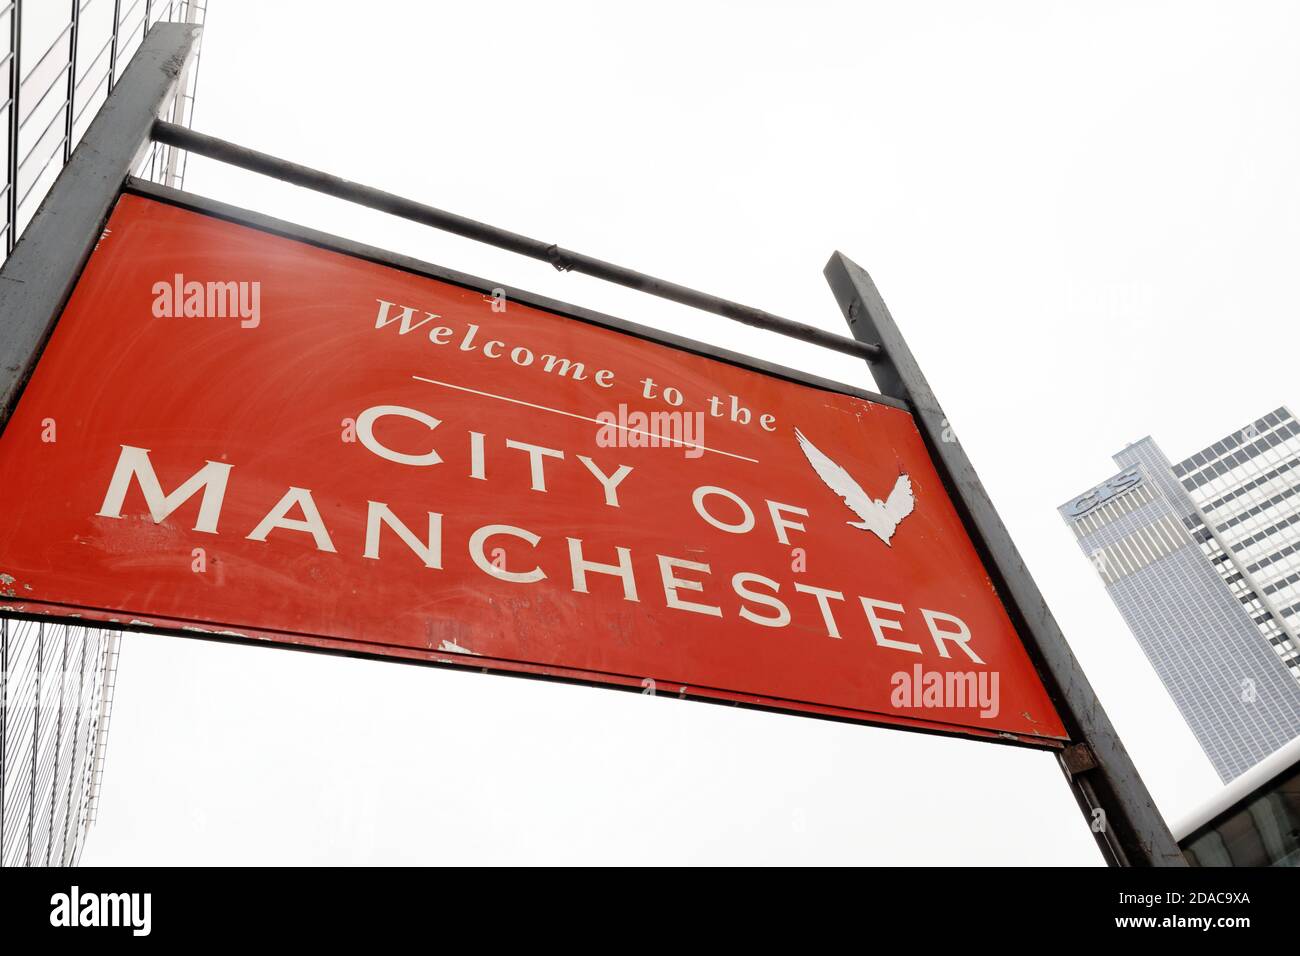 Road sign proclaiming: Welcome to the CITY OF MANCHESTER. The 118m tall CIS Tower building lies in the distance. Stock Photo